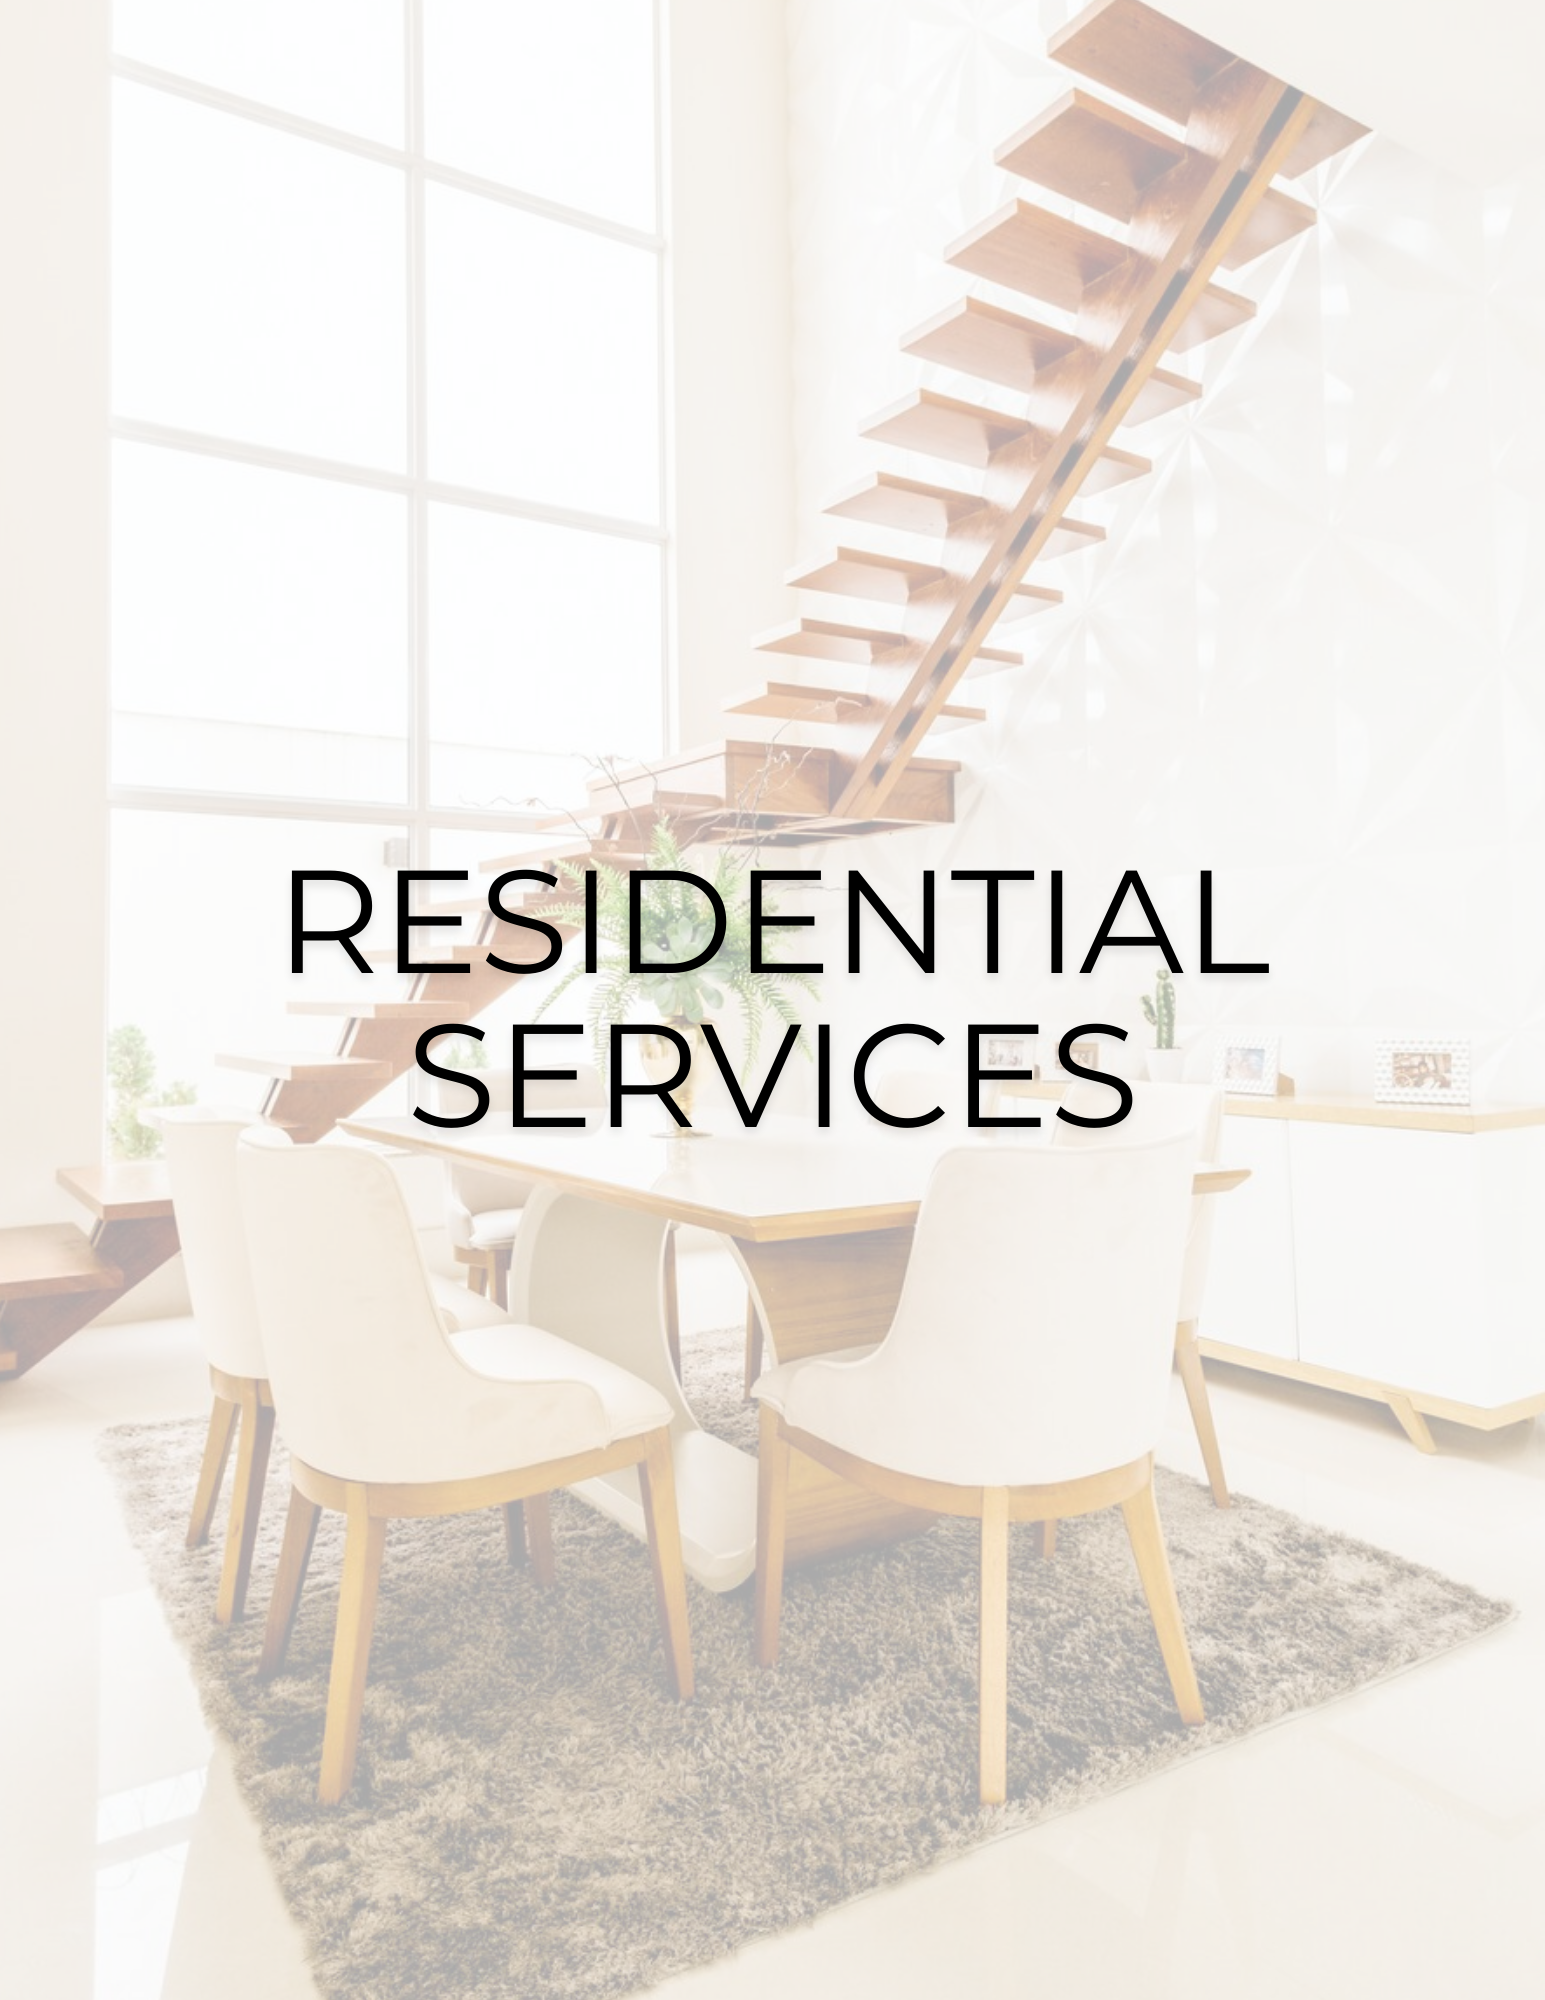 Residential and Commercial Houston, Texas architectural services2